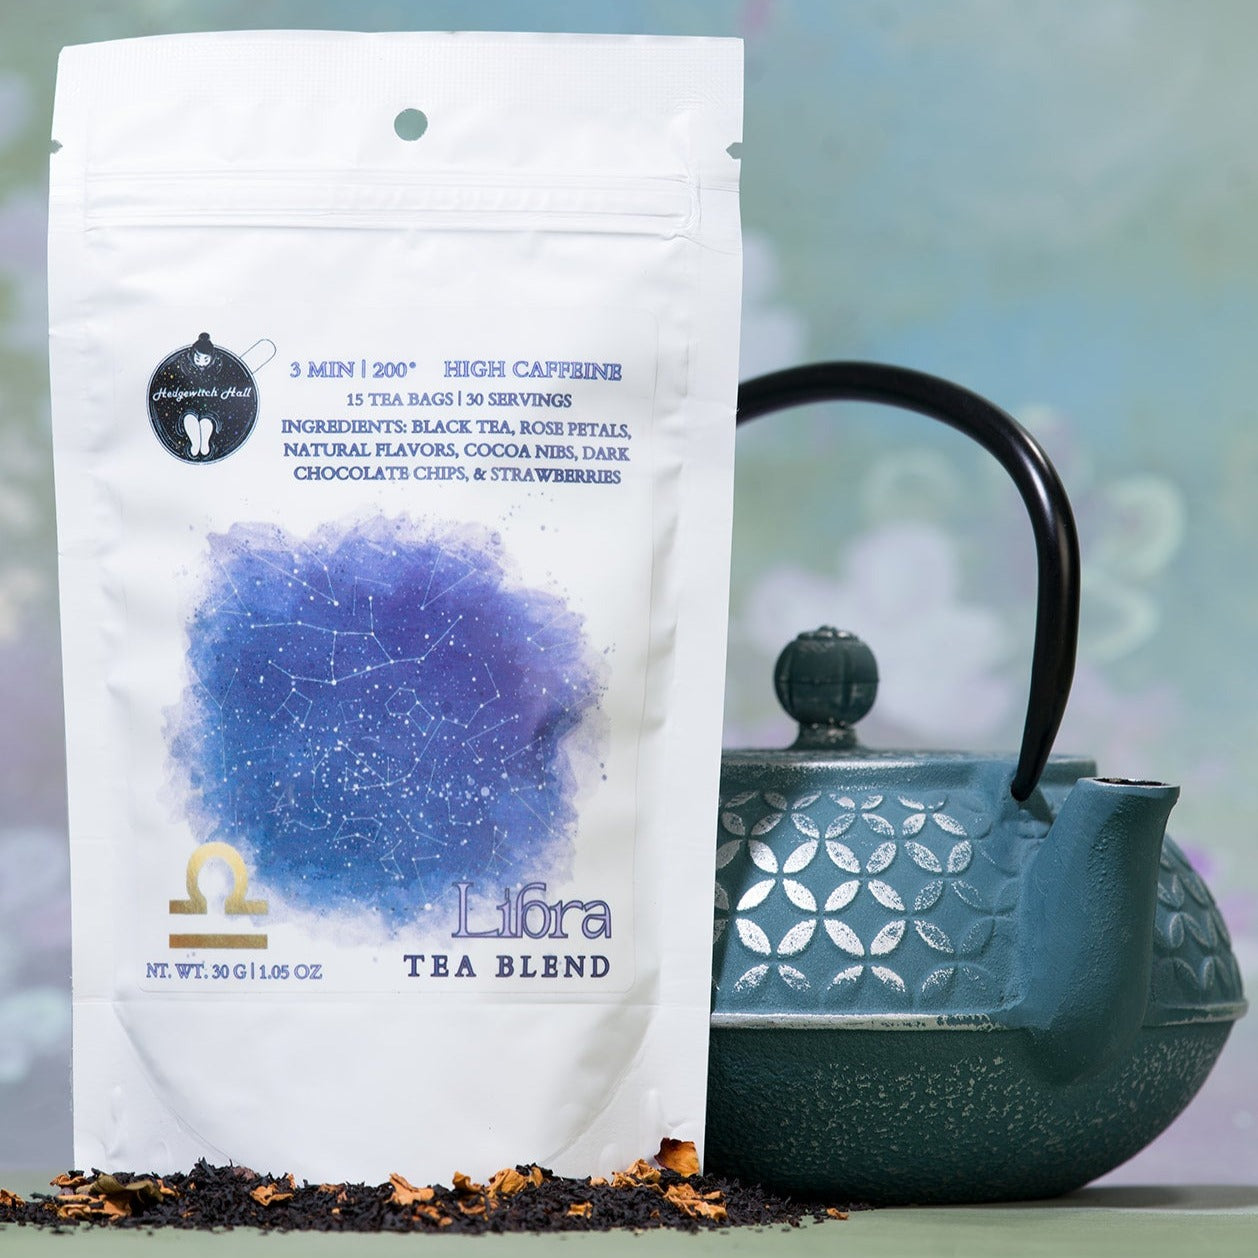 Product photo of Libra tea blend and teal teapot.